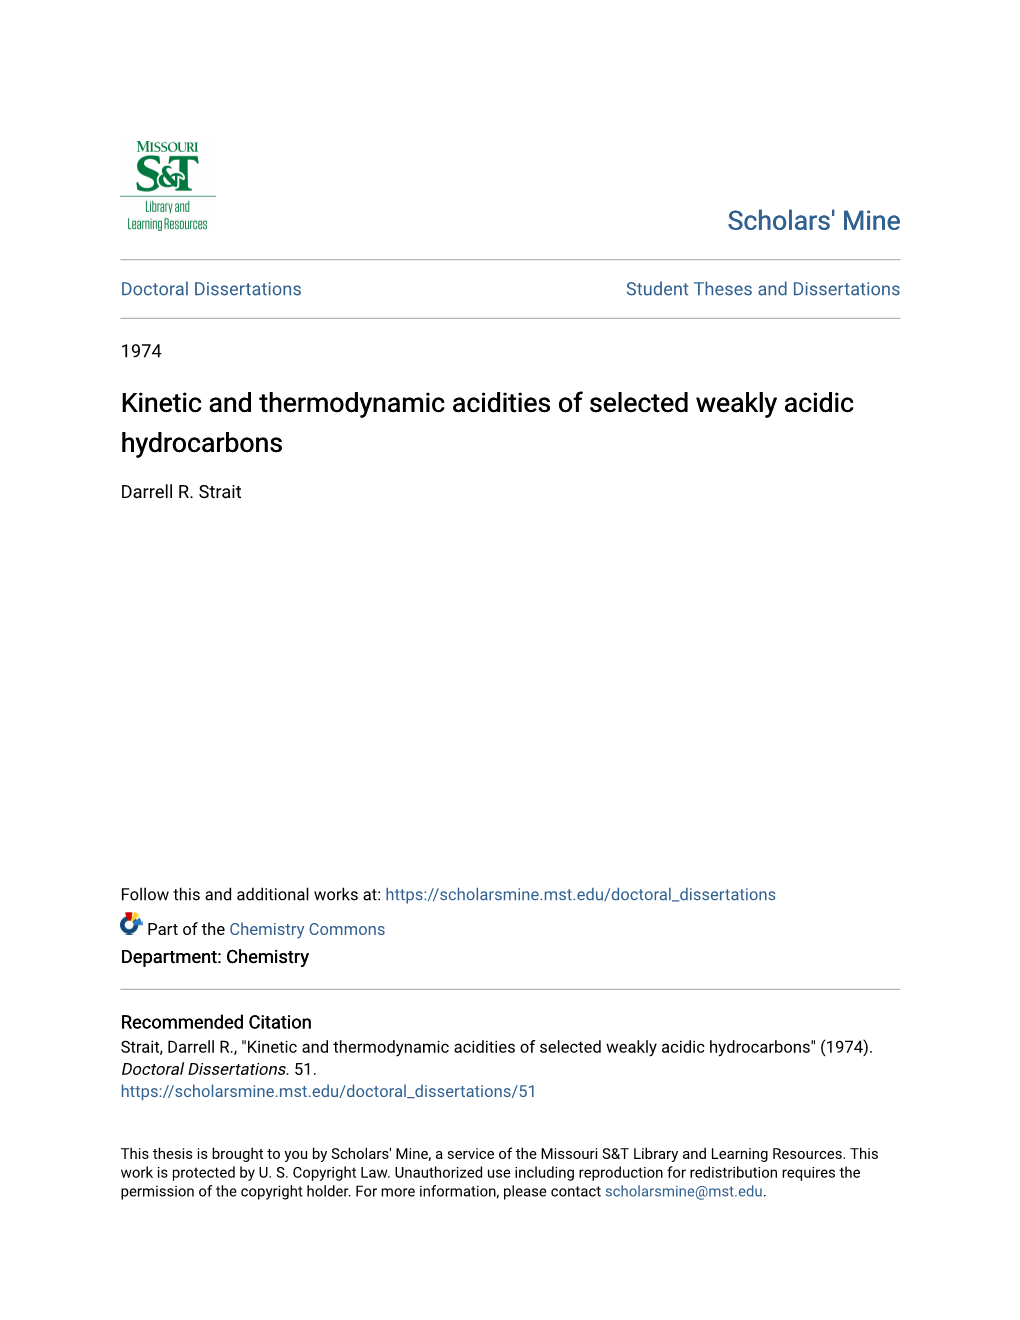 Kinetic and Thermodynamic Acidities of Selected Weakly Acidic Hydrocarbons